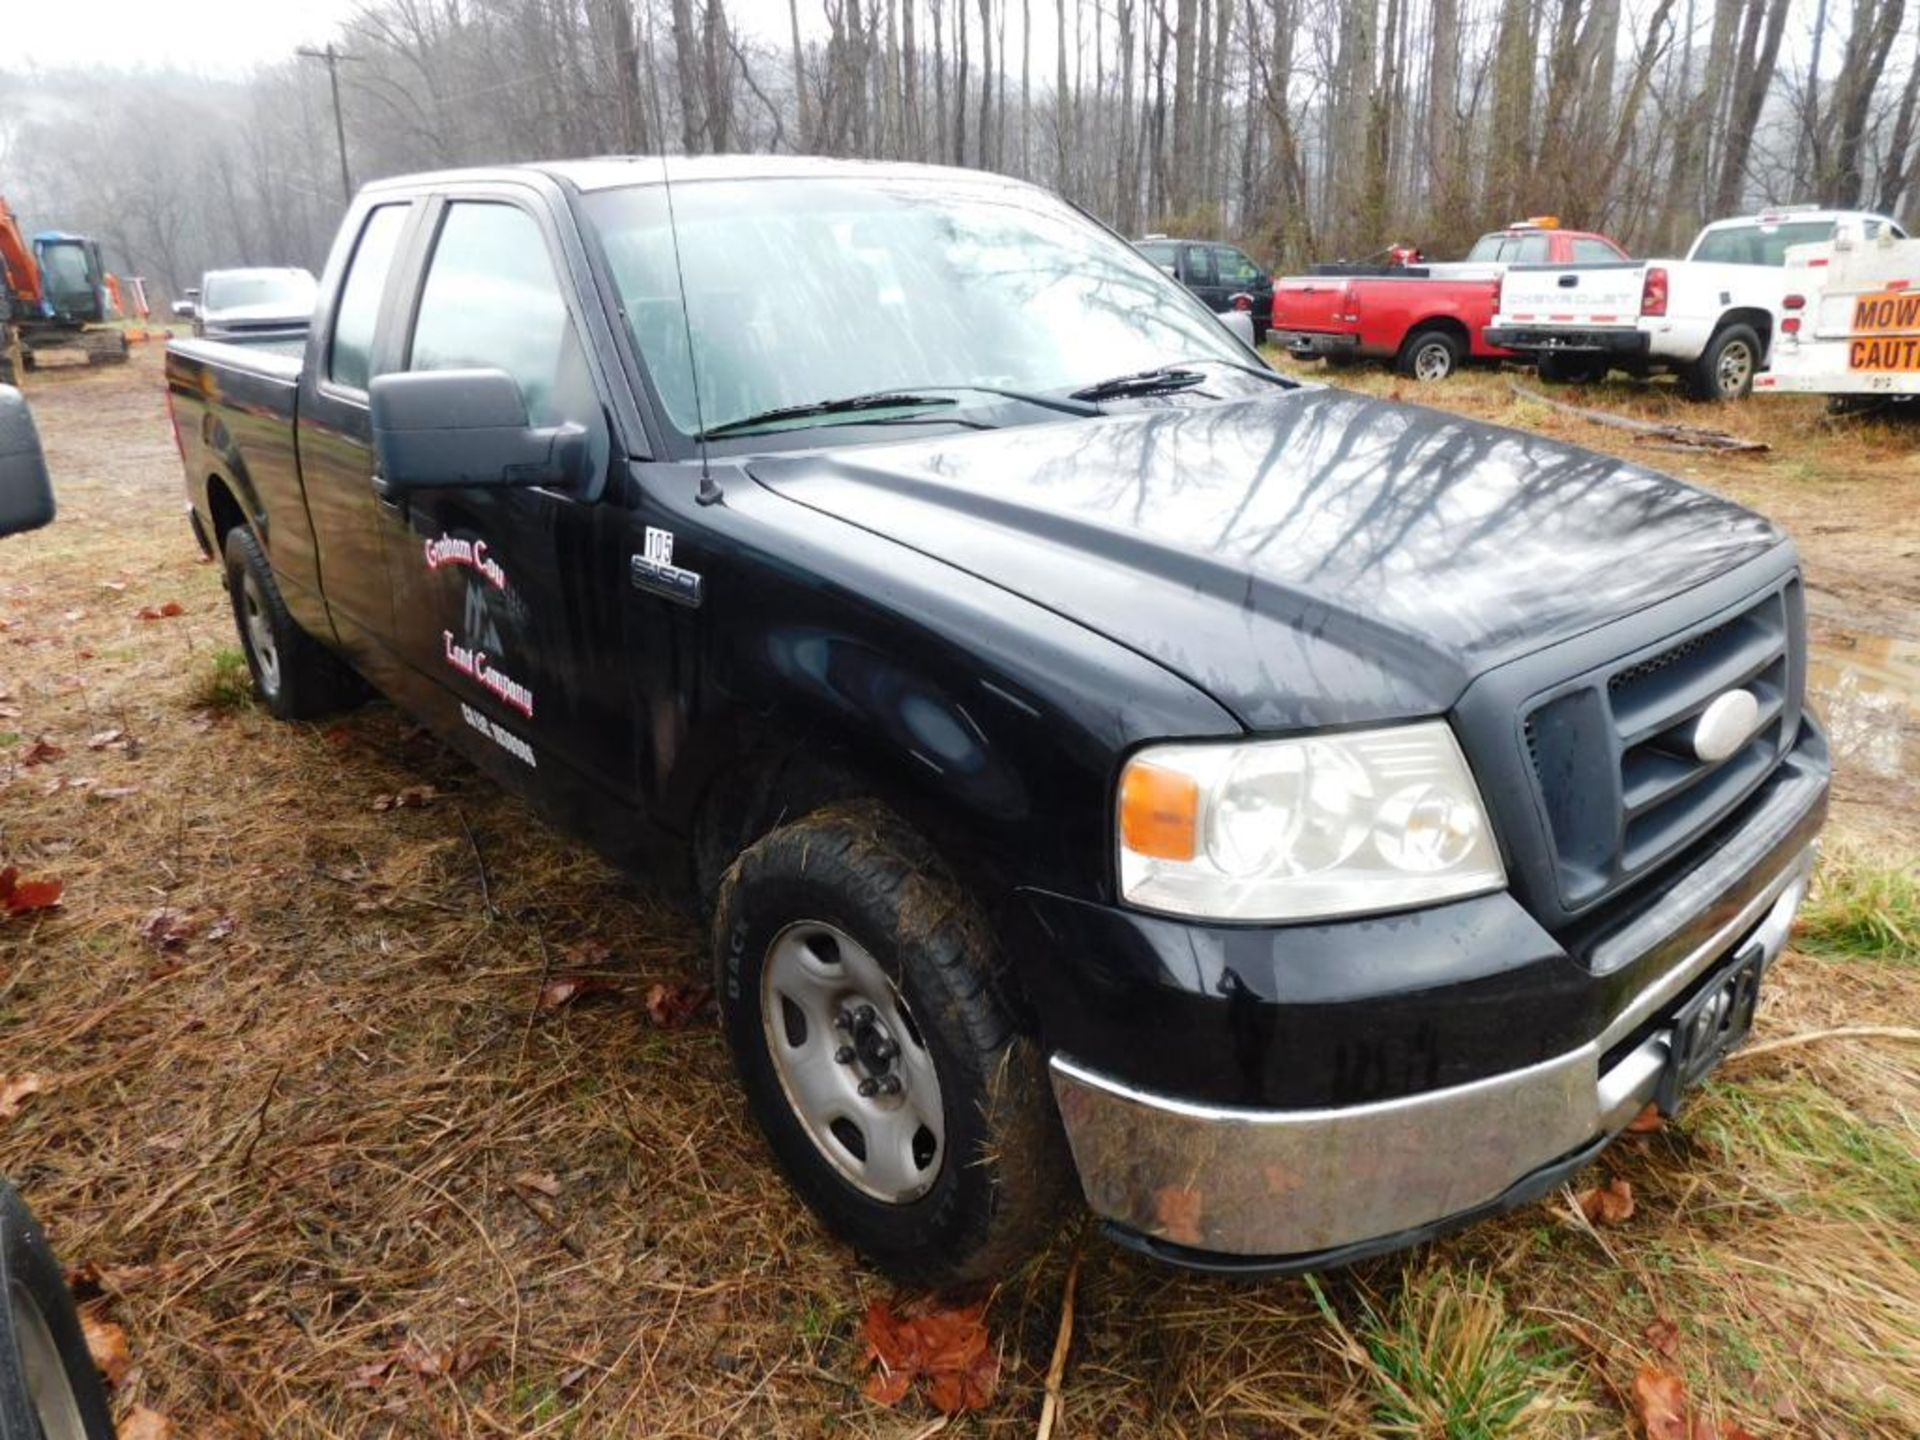 2008 Ford F150 XL Extended Cab, 2-Wheel Drive, 4.6 Liter, V8, Gasoline Motor, Auto, 6'6" Bed, 245,16 - Image 2 of 7